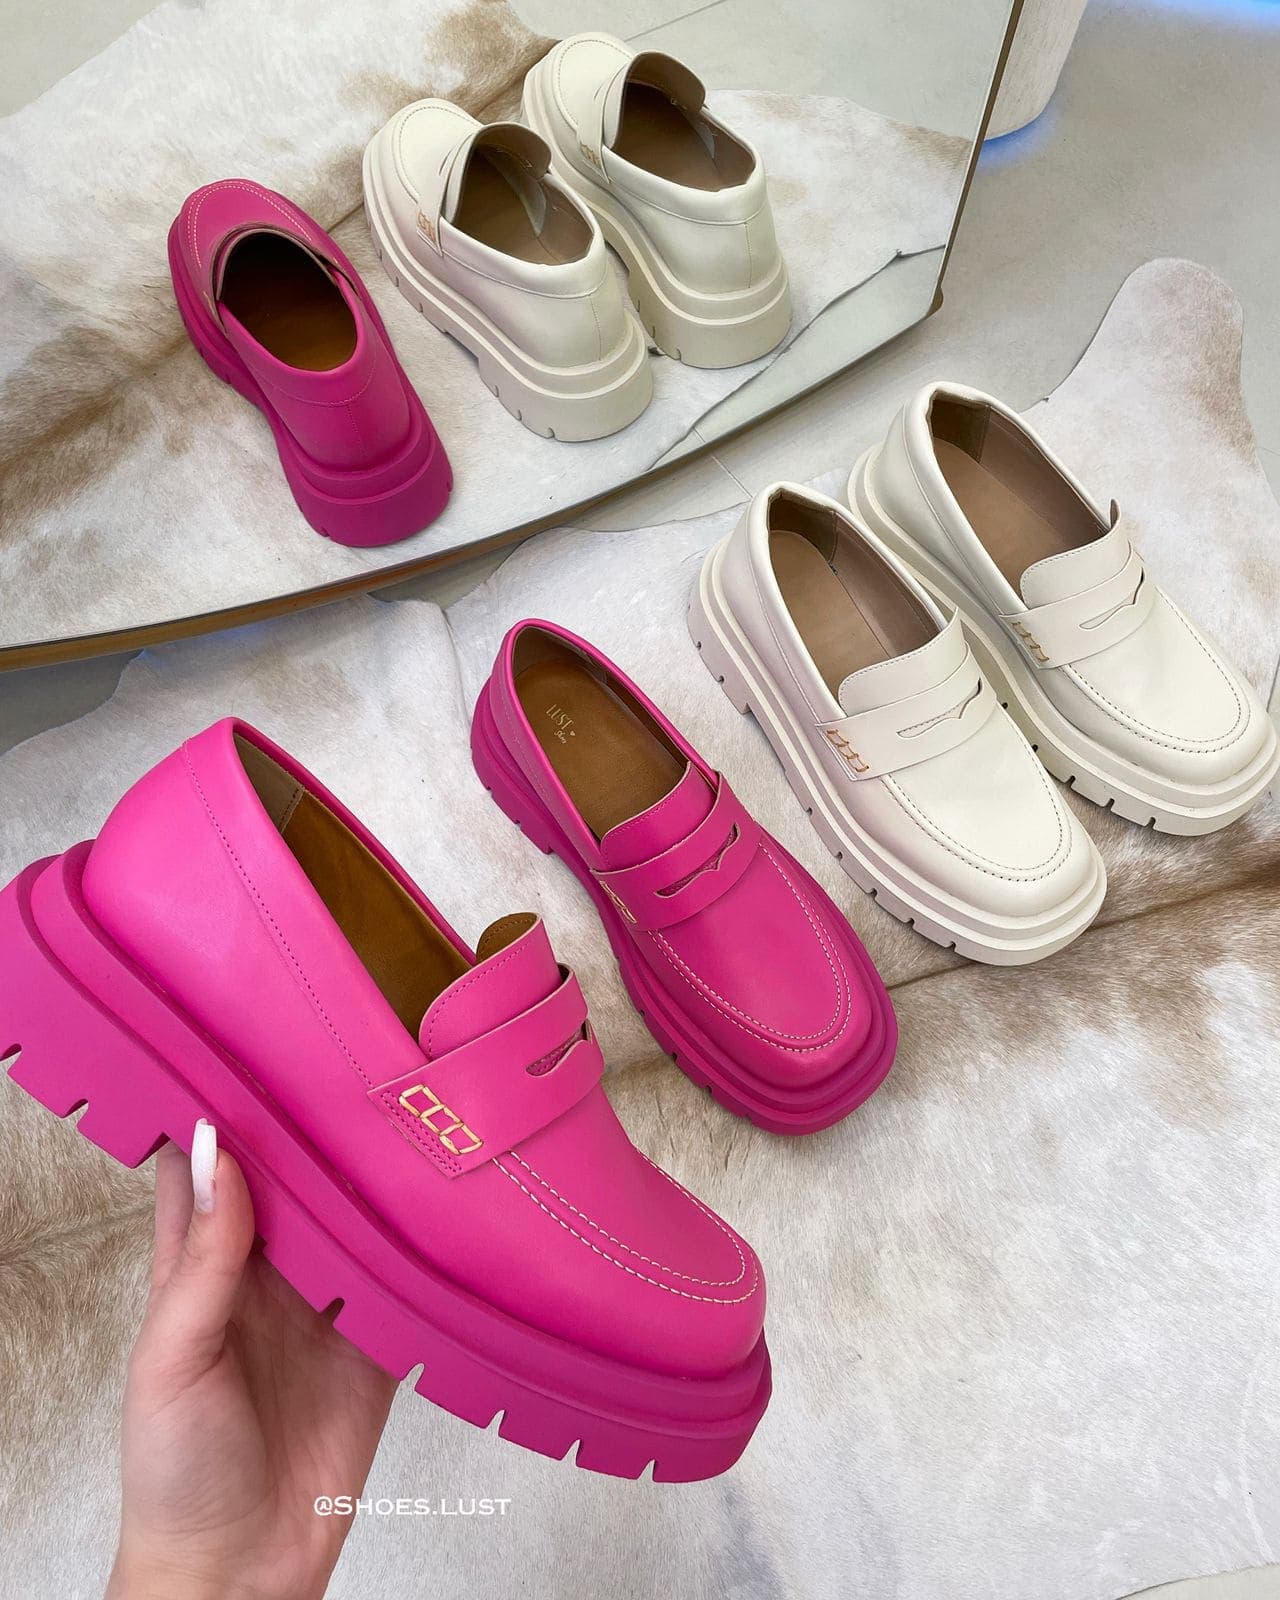 mocassim lust shoes orly pink 82634 1.jpeg